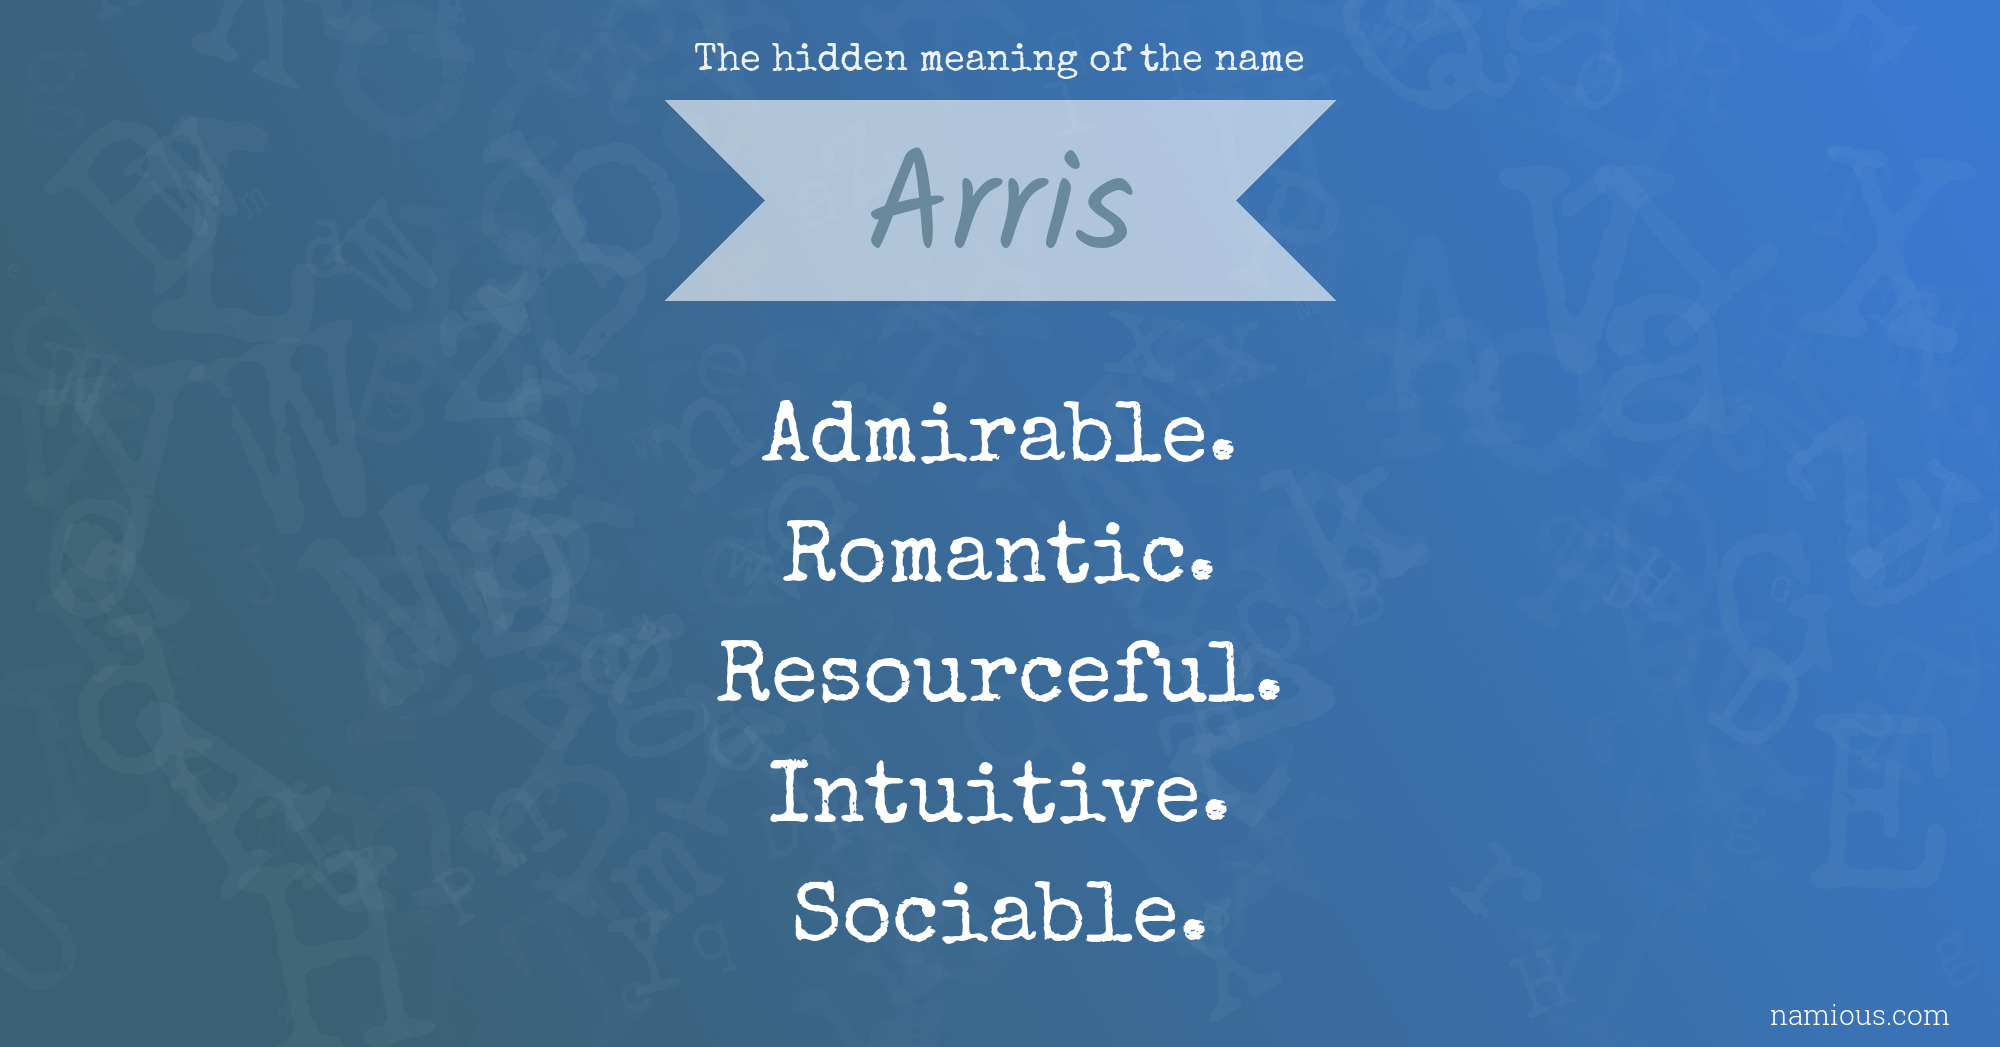 The hidden meaning of the name Arris